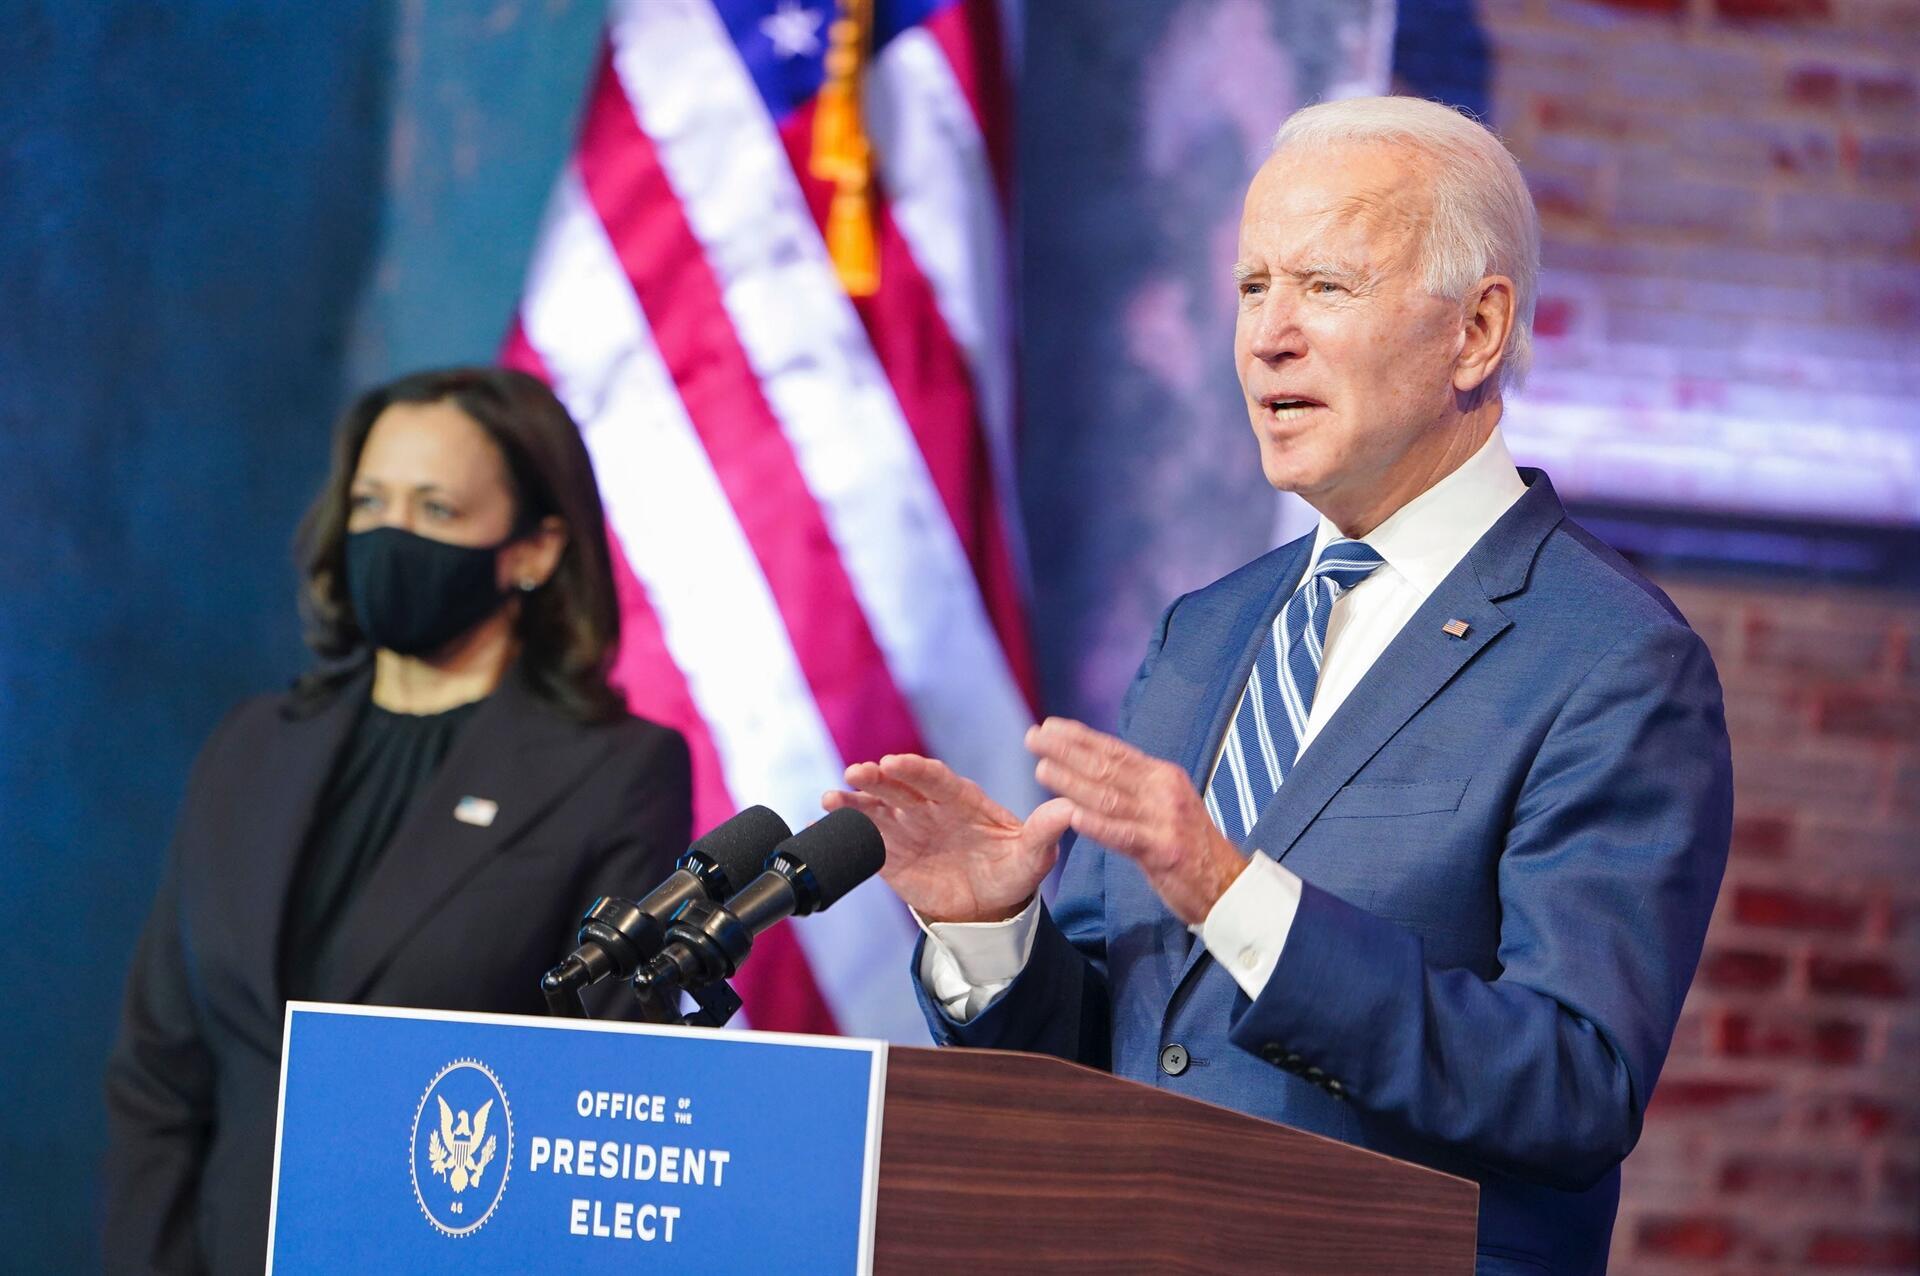 Biden tells world leaders 'America is back' but Pompeo digs in - World News